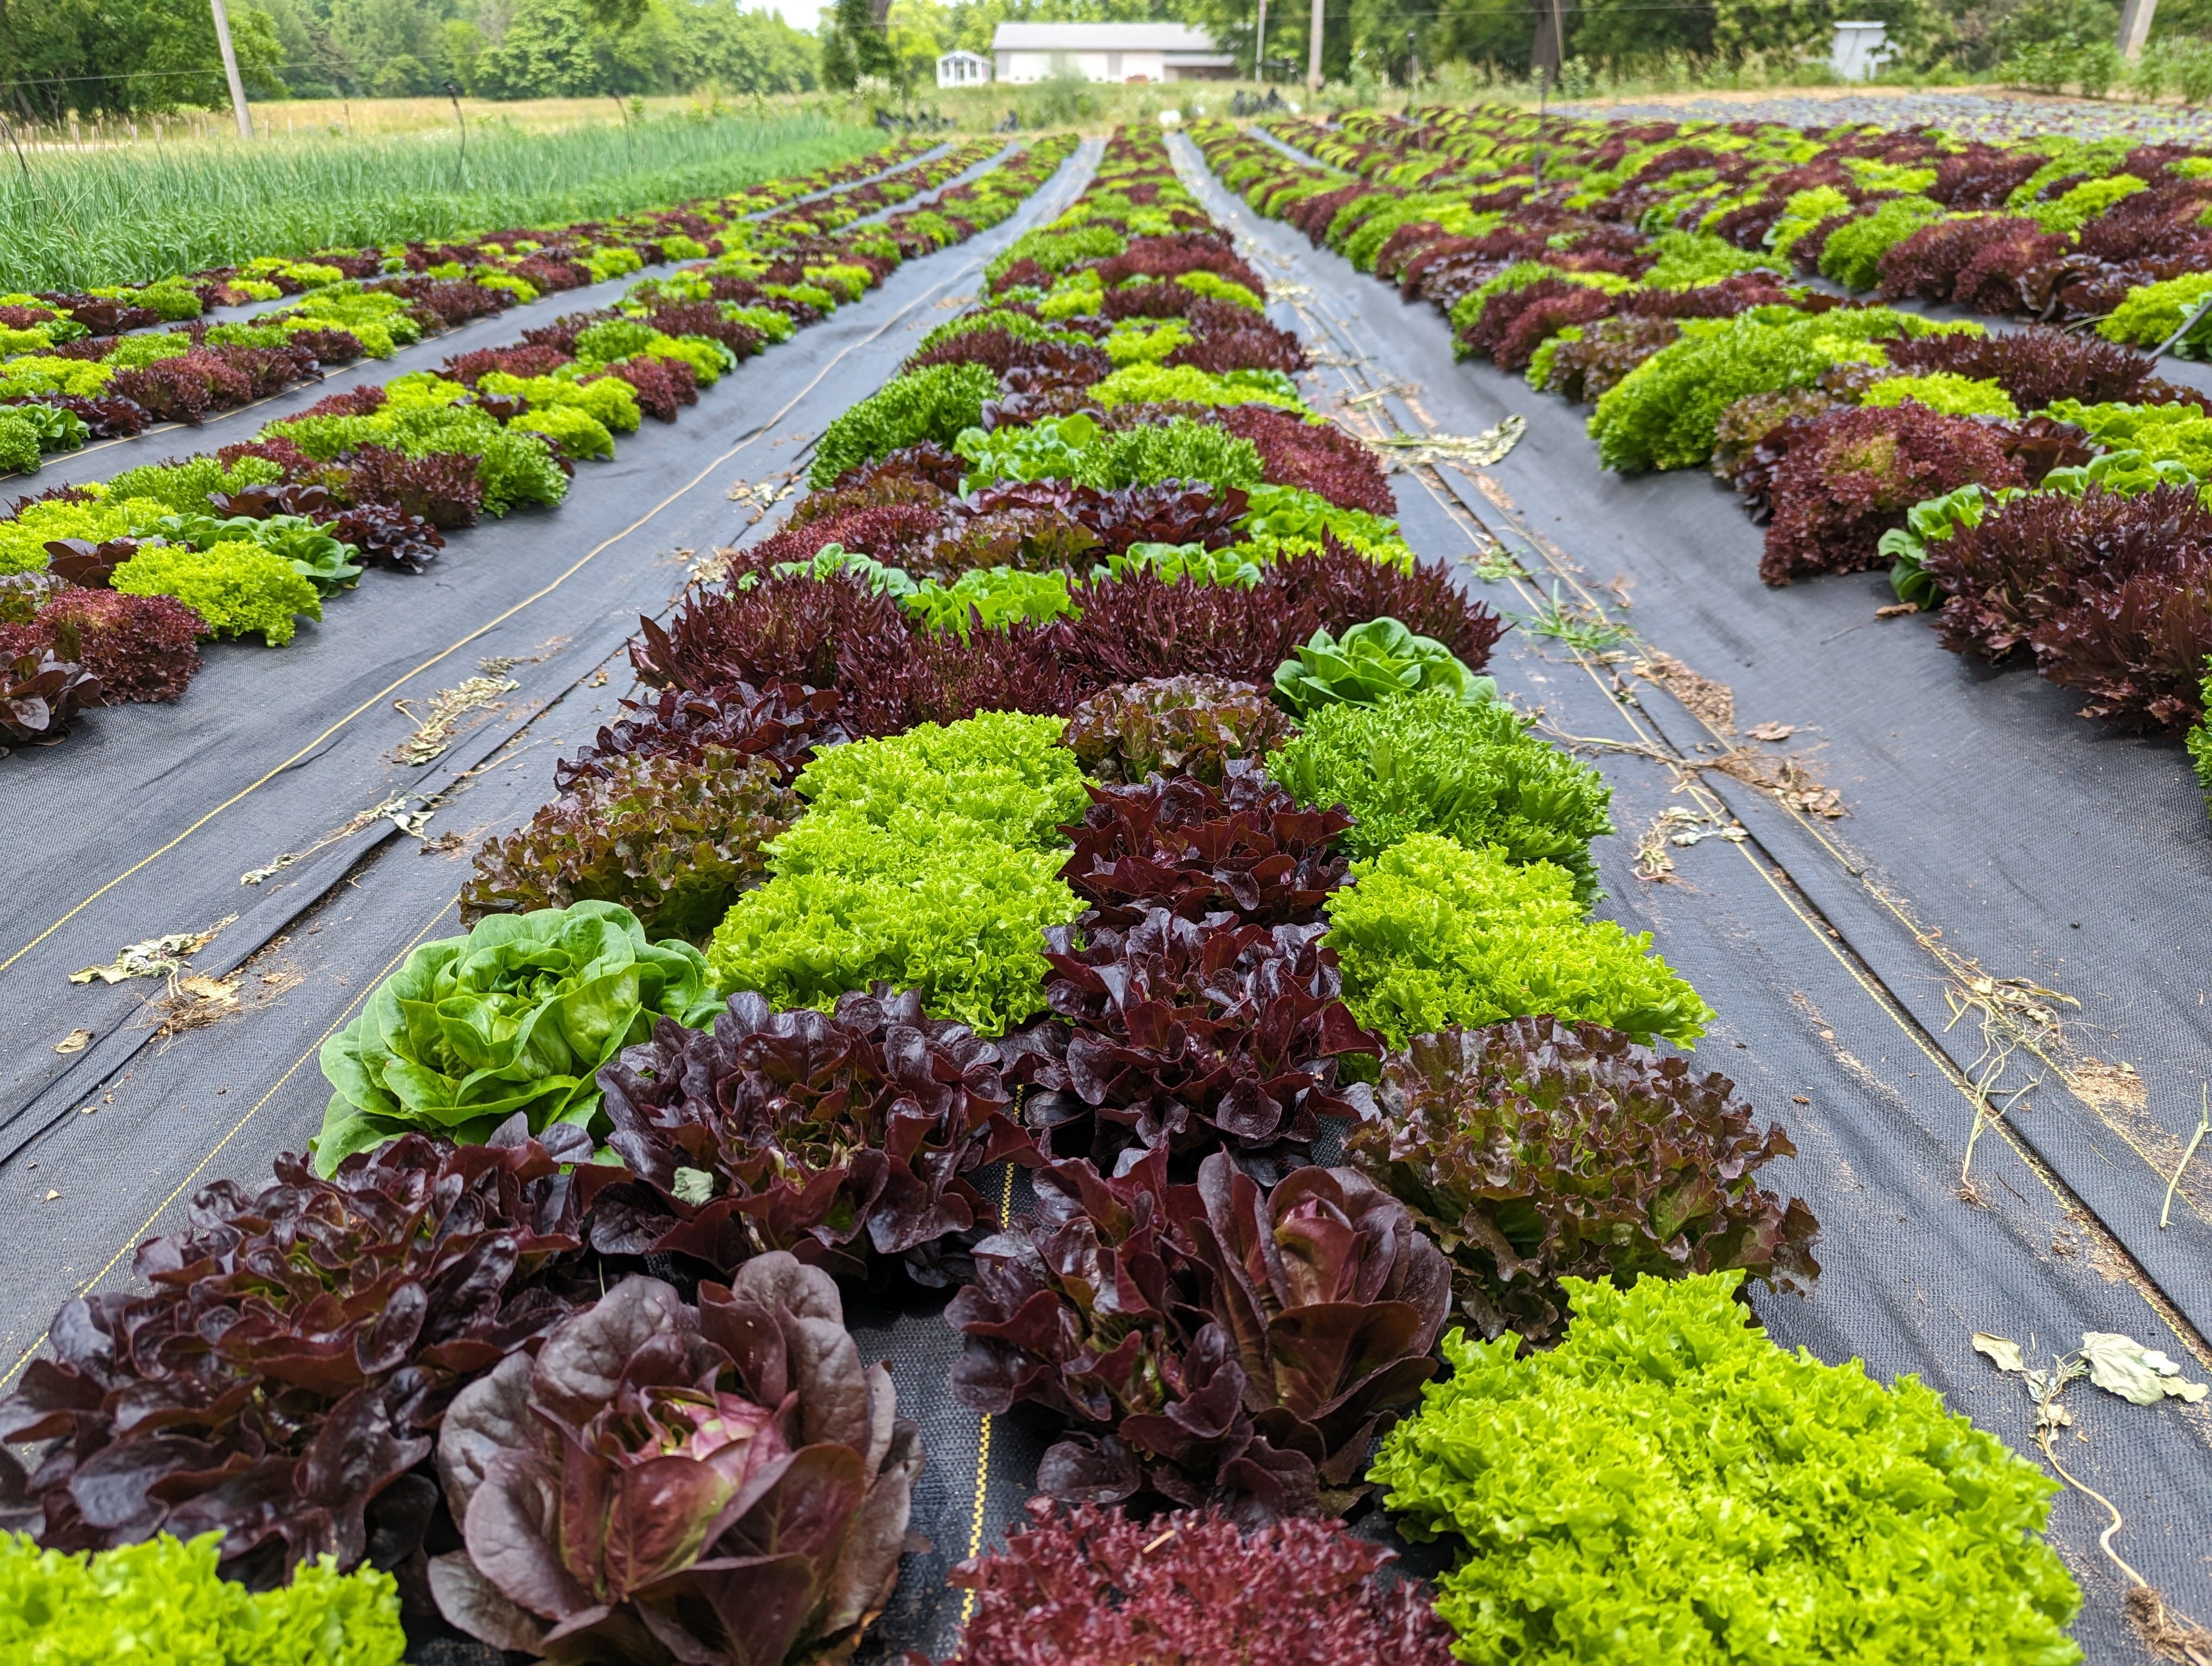 A bed of different colored Salanova lettuces.